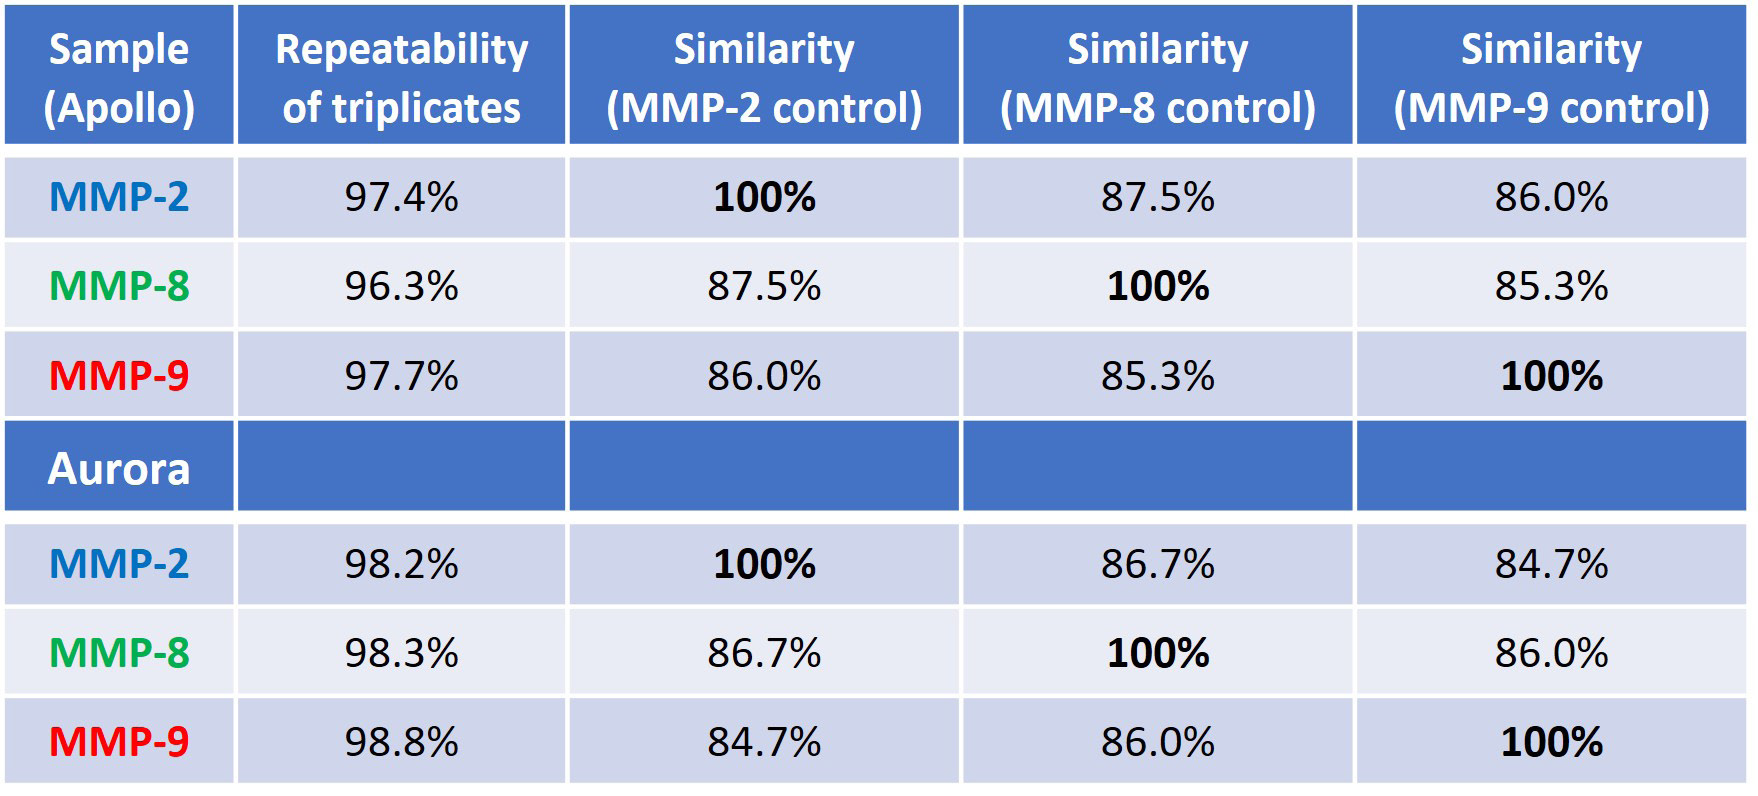 Repeatability of measurement and sample-to-sample similarity (the control for each similarity comparison is set at 100%). The top portion of the table is data from Apollo, and bottom is comparing data from Aurora